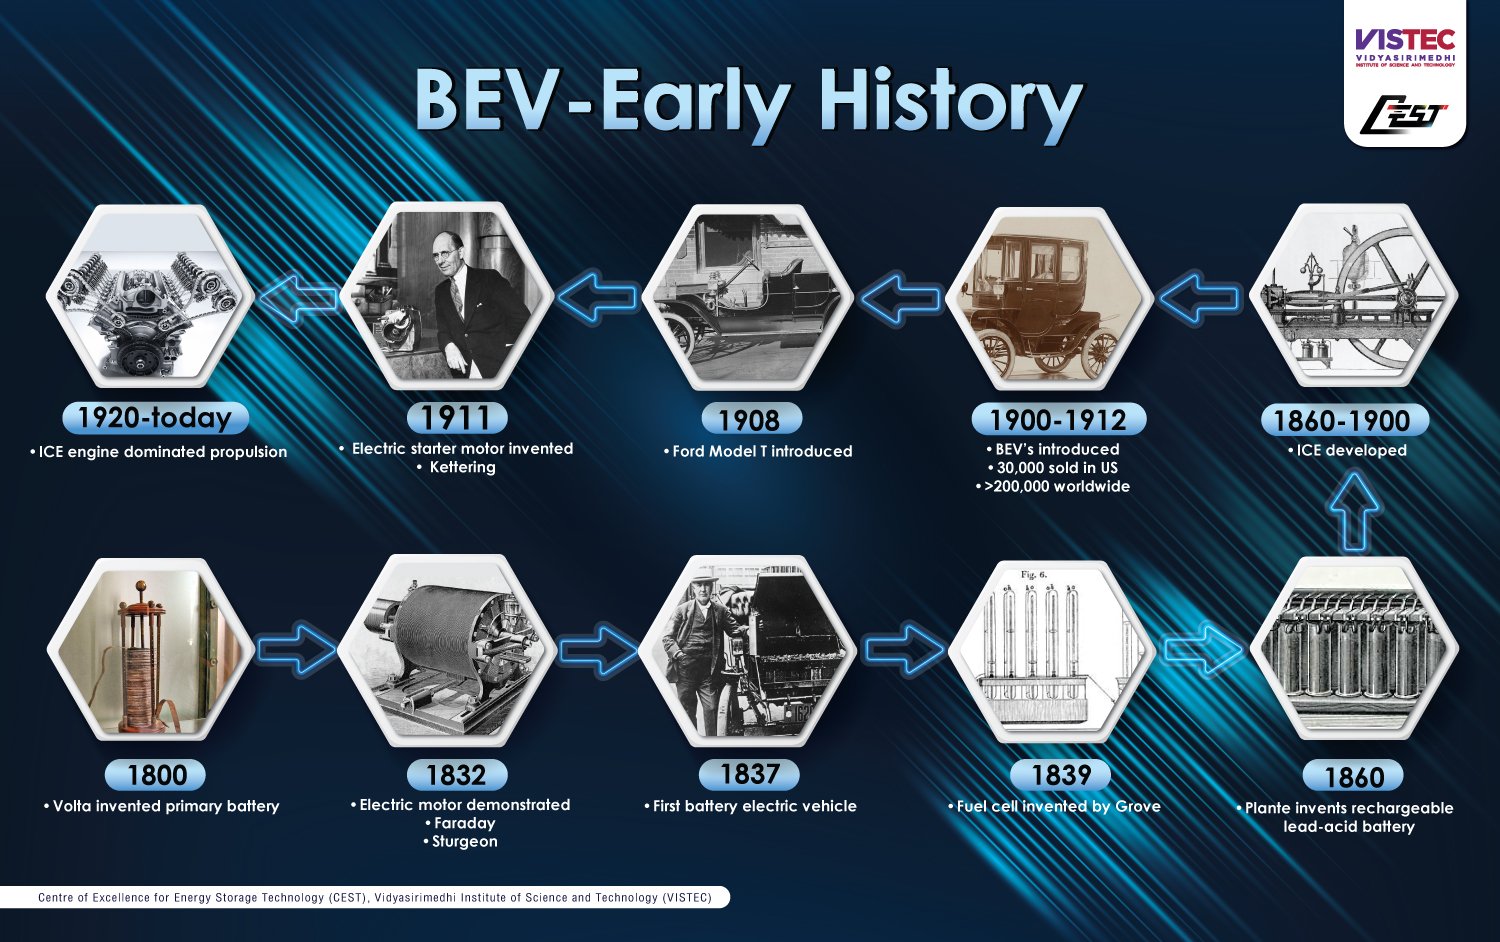 Early History of Battery Electric Vehicles (BEV)